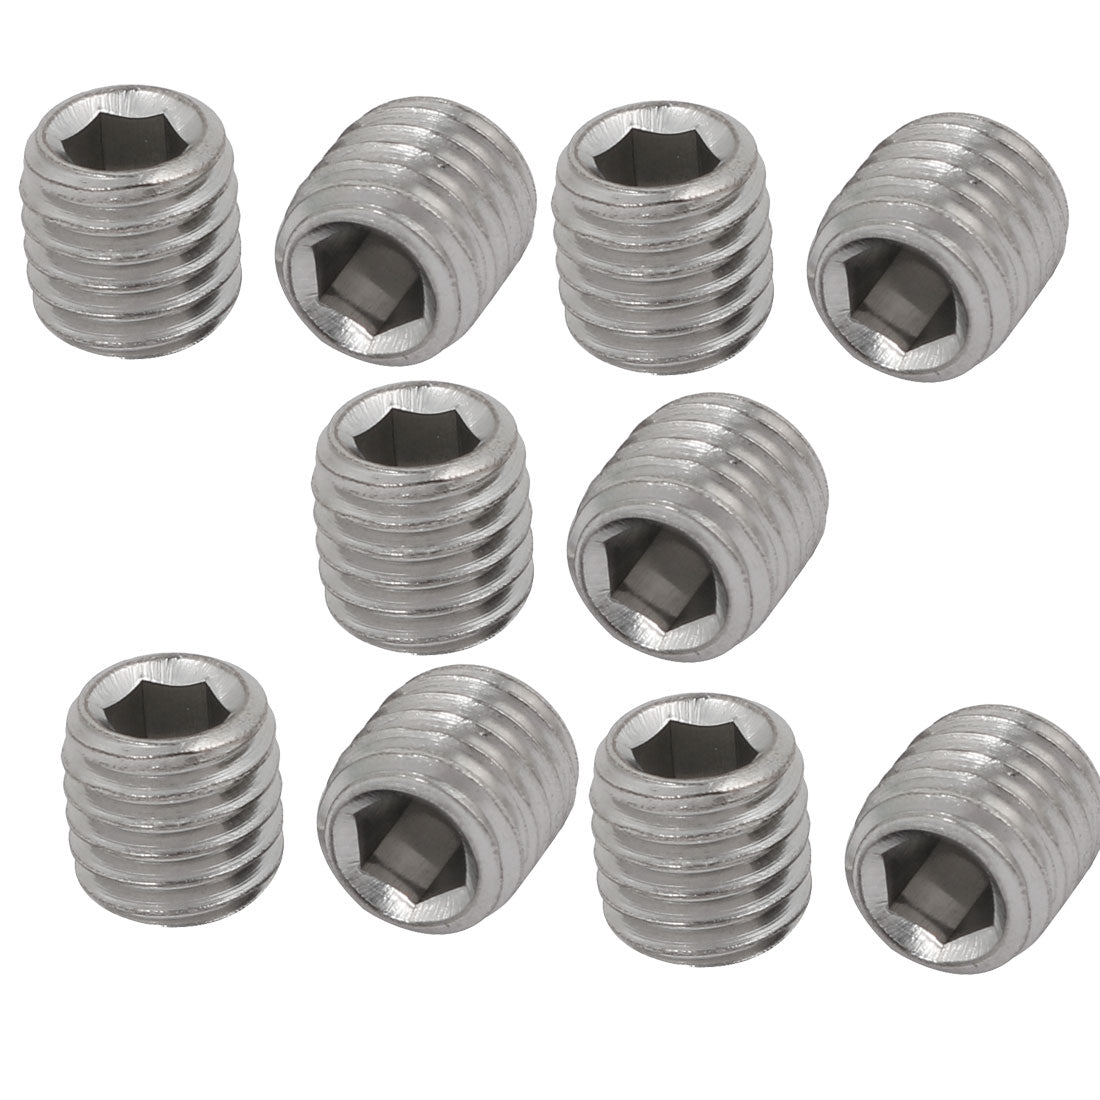 uxcell Uxcell 10 Pcs M10 x 10mm 304 Stainless Steel Hex Socket Drive Flat Point Grub Screw